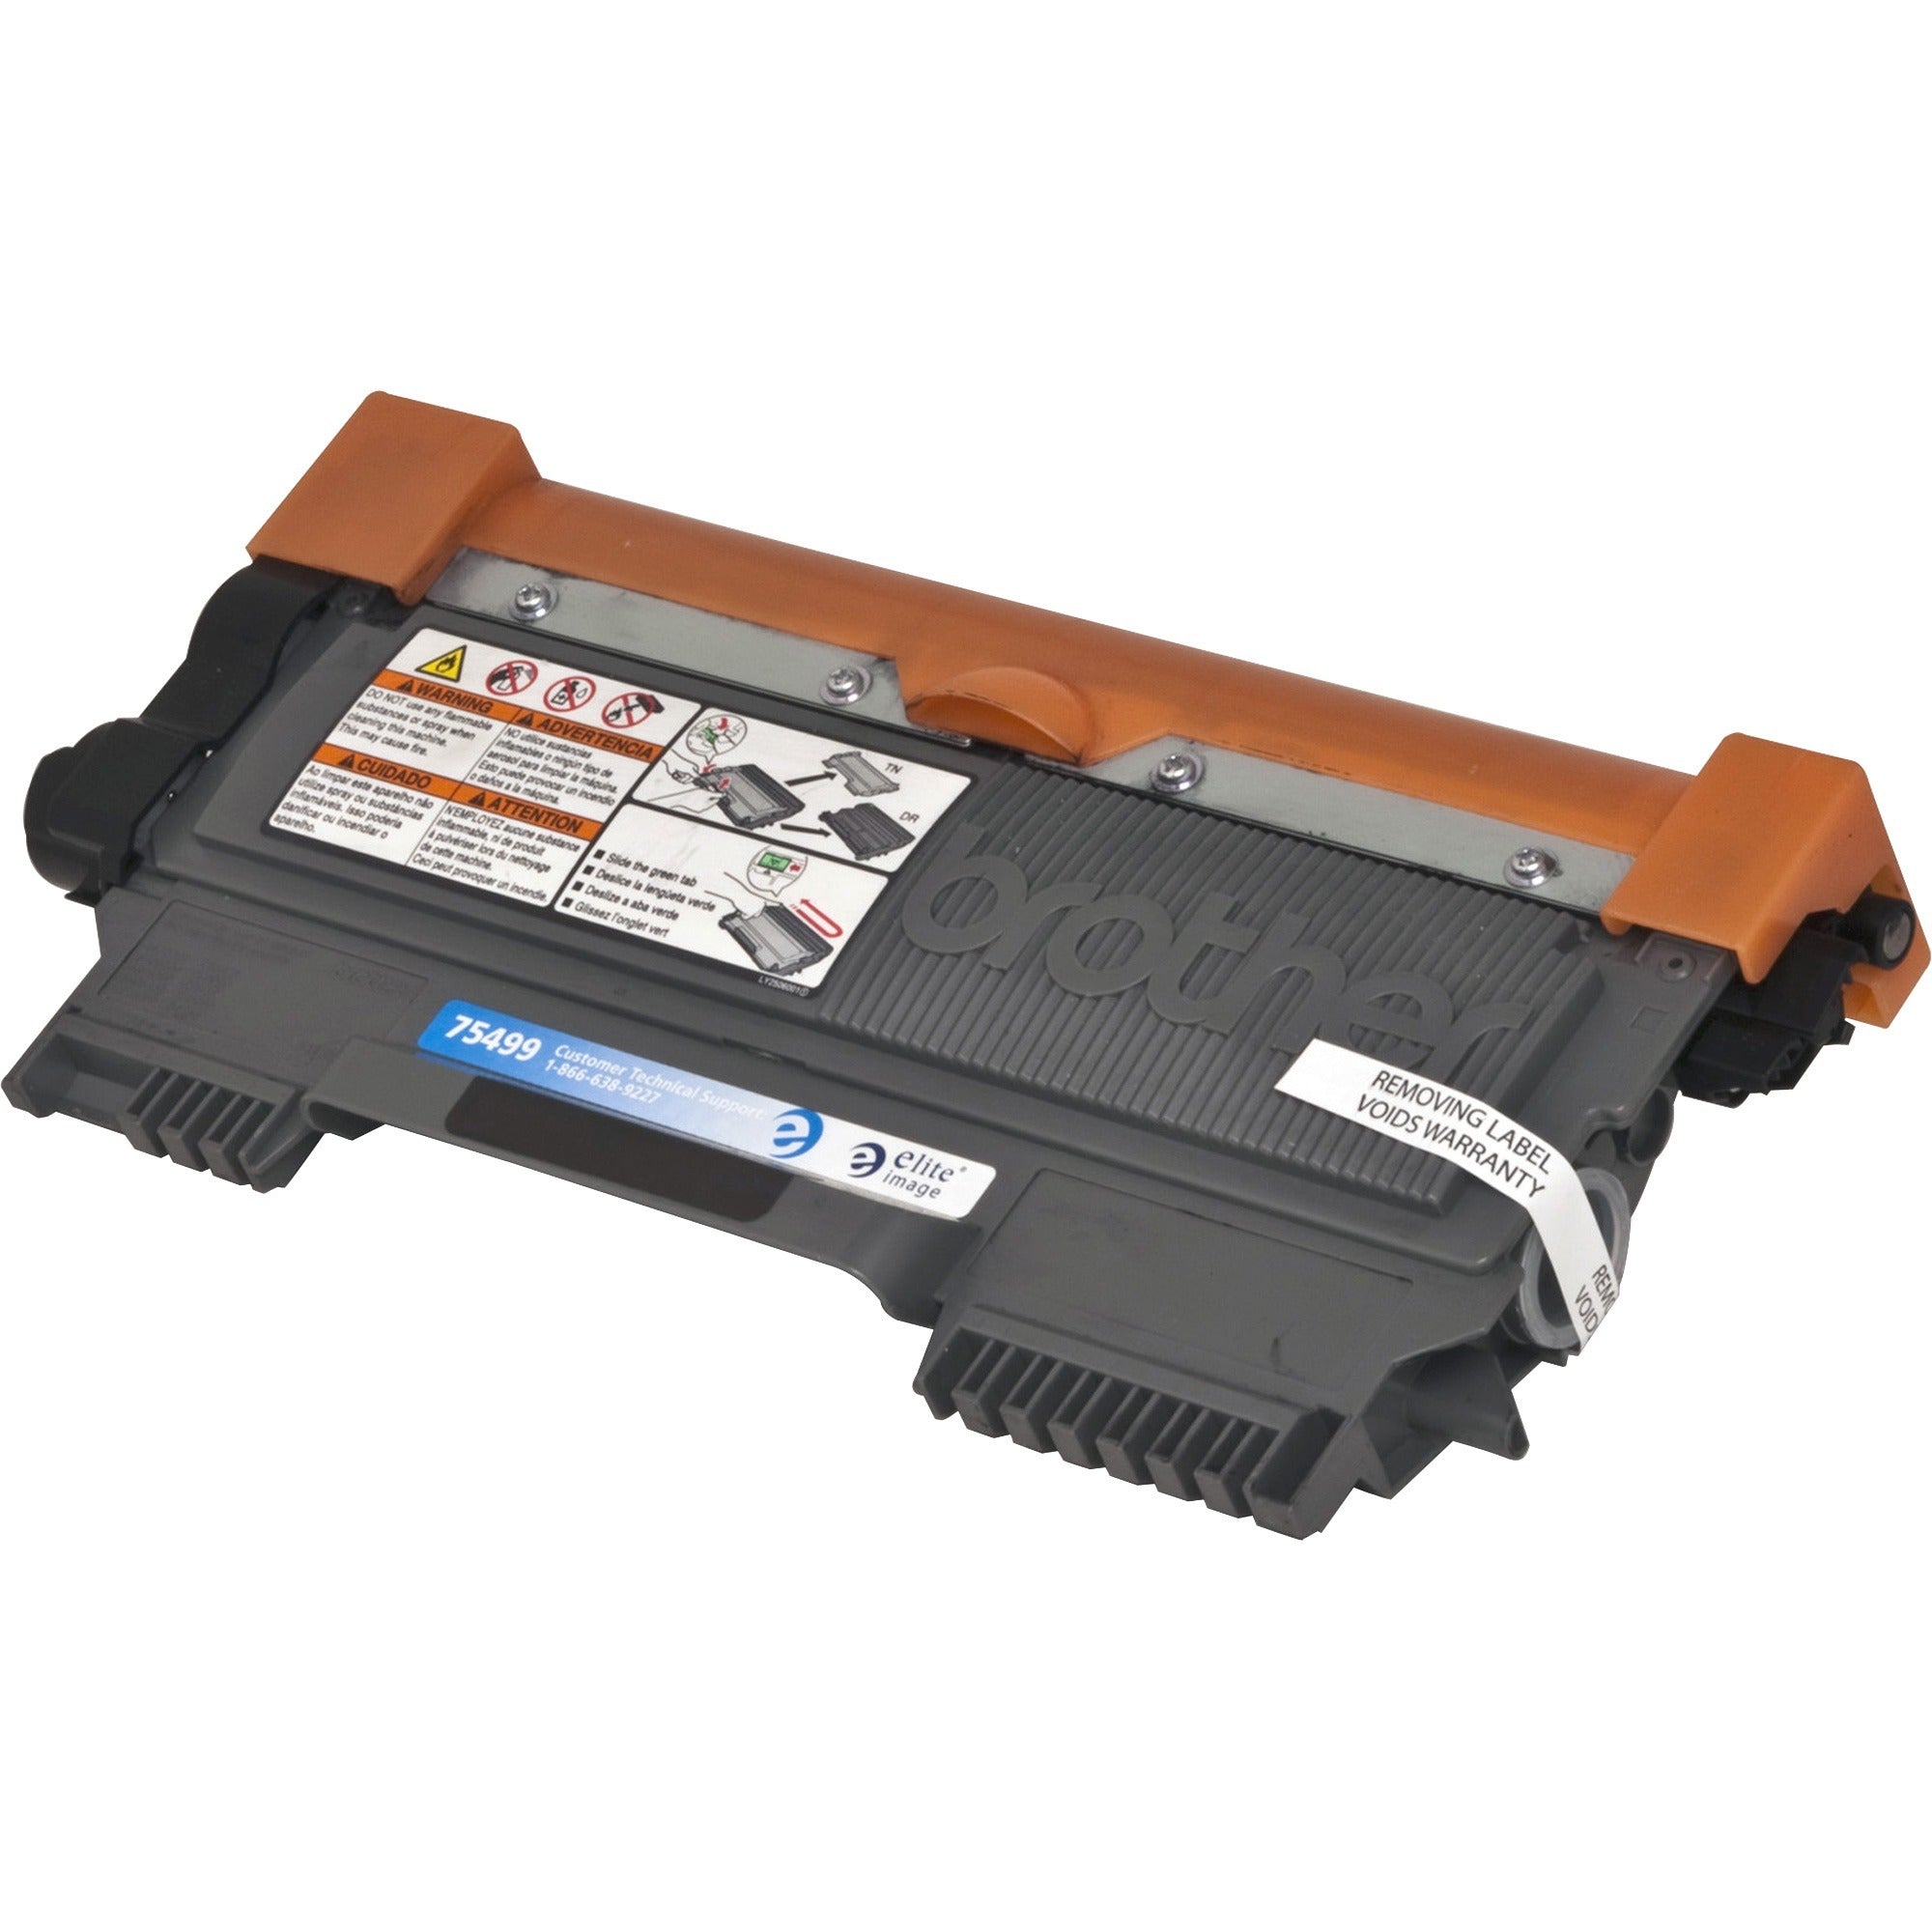 Elite Image Remanufactured High Yield Laser Toner Cartridge - Alternative for Brother TN450 - Black - 1 Each - 2600 Pages - 3